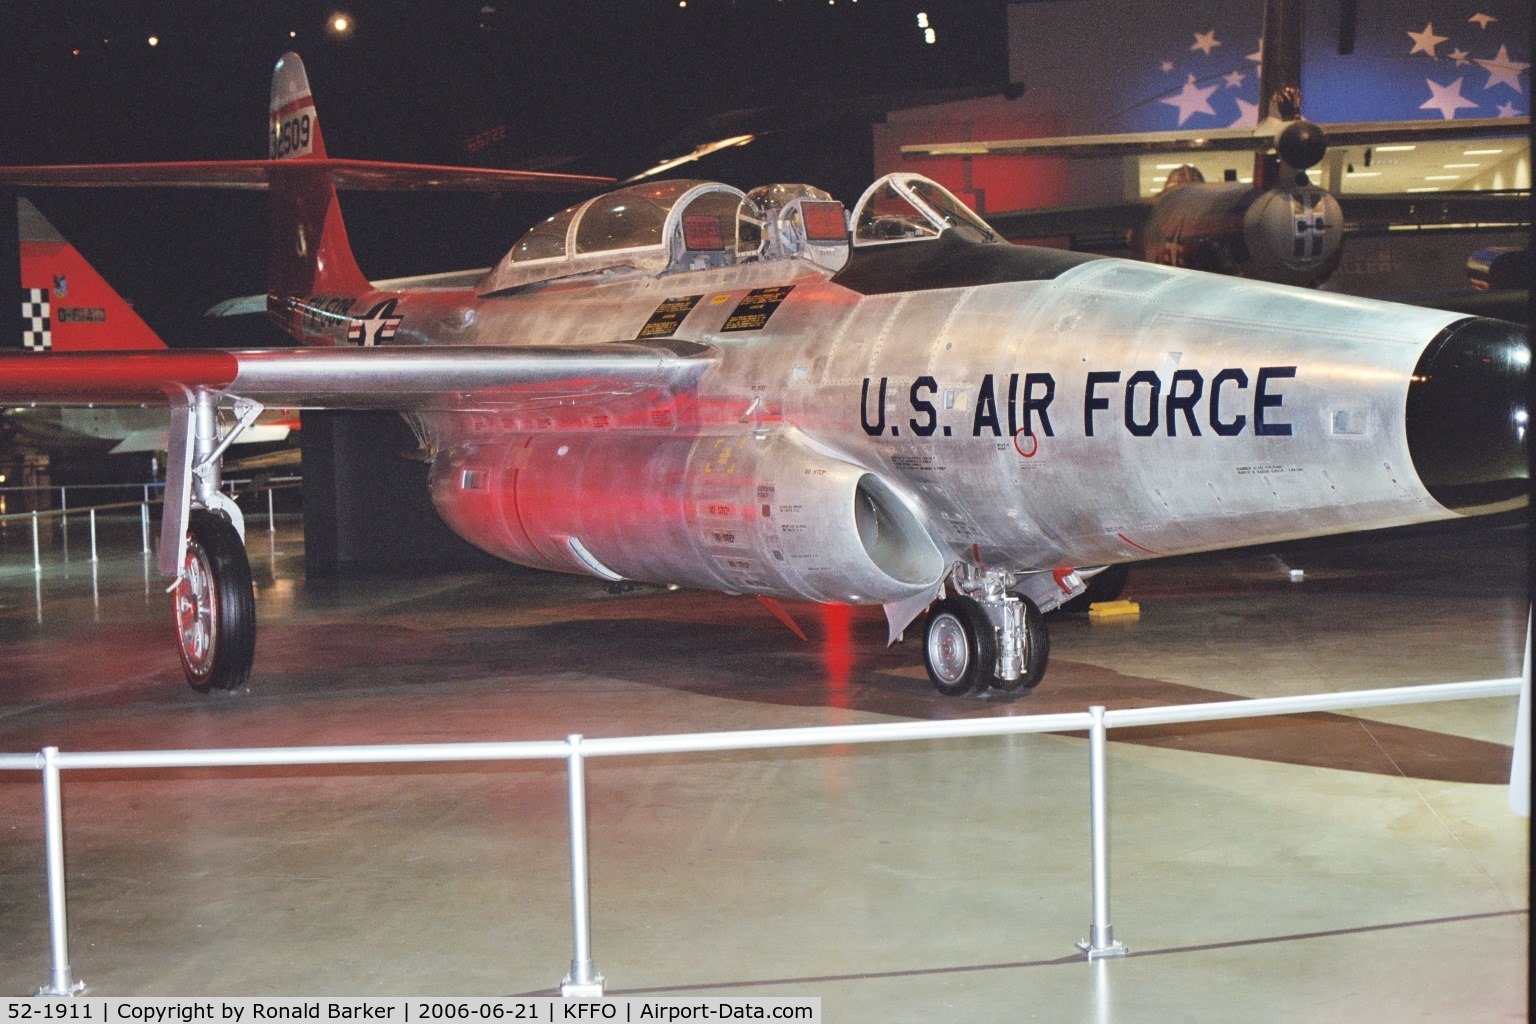 52-1911, 1952 Northrop F-89D Scorpion C/N Not found 52-1911, 52-1911 painted as 53-2509
National Museum of the Air Force